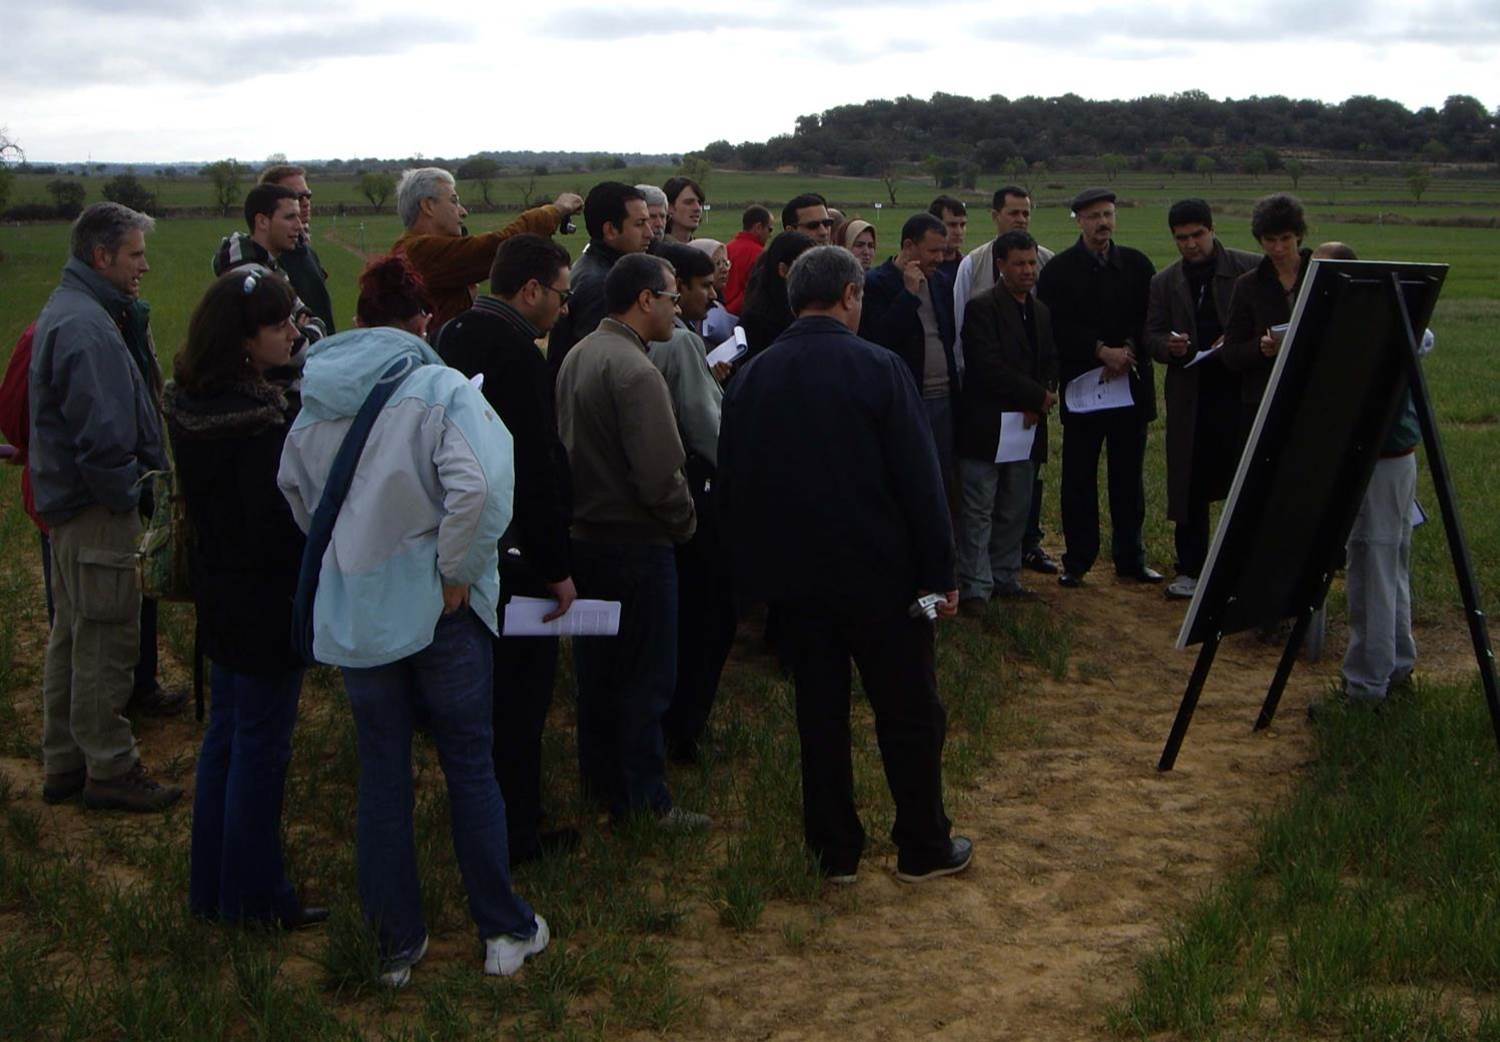 Participants gather in the field for viewing conservation agriculture on a nearby farm 